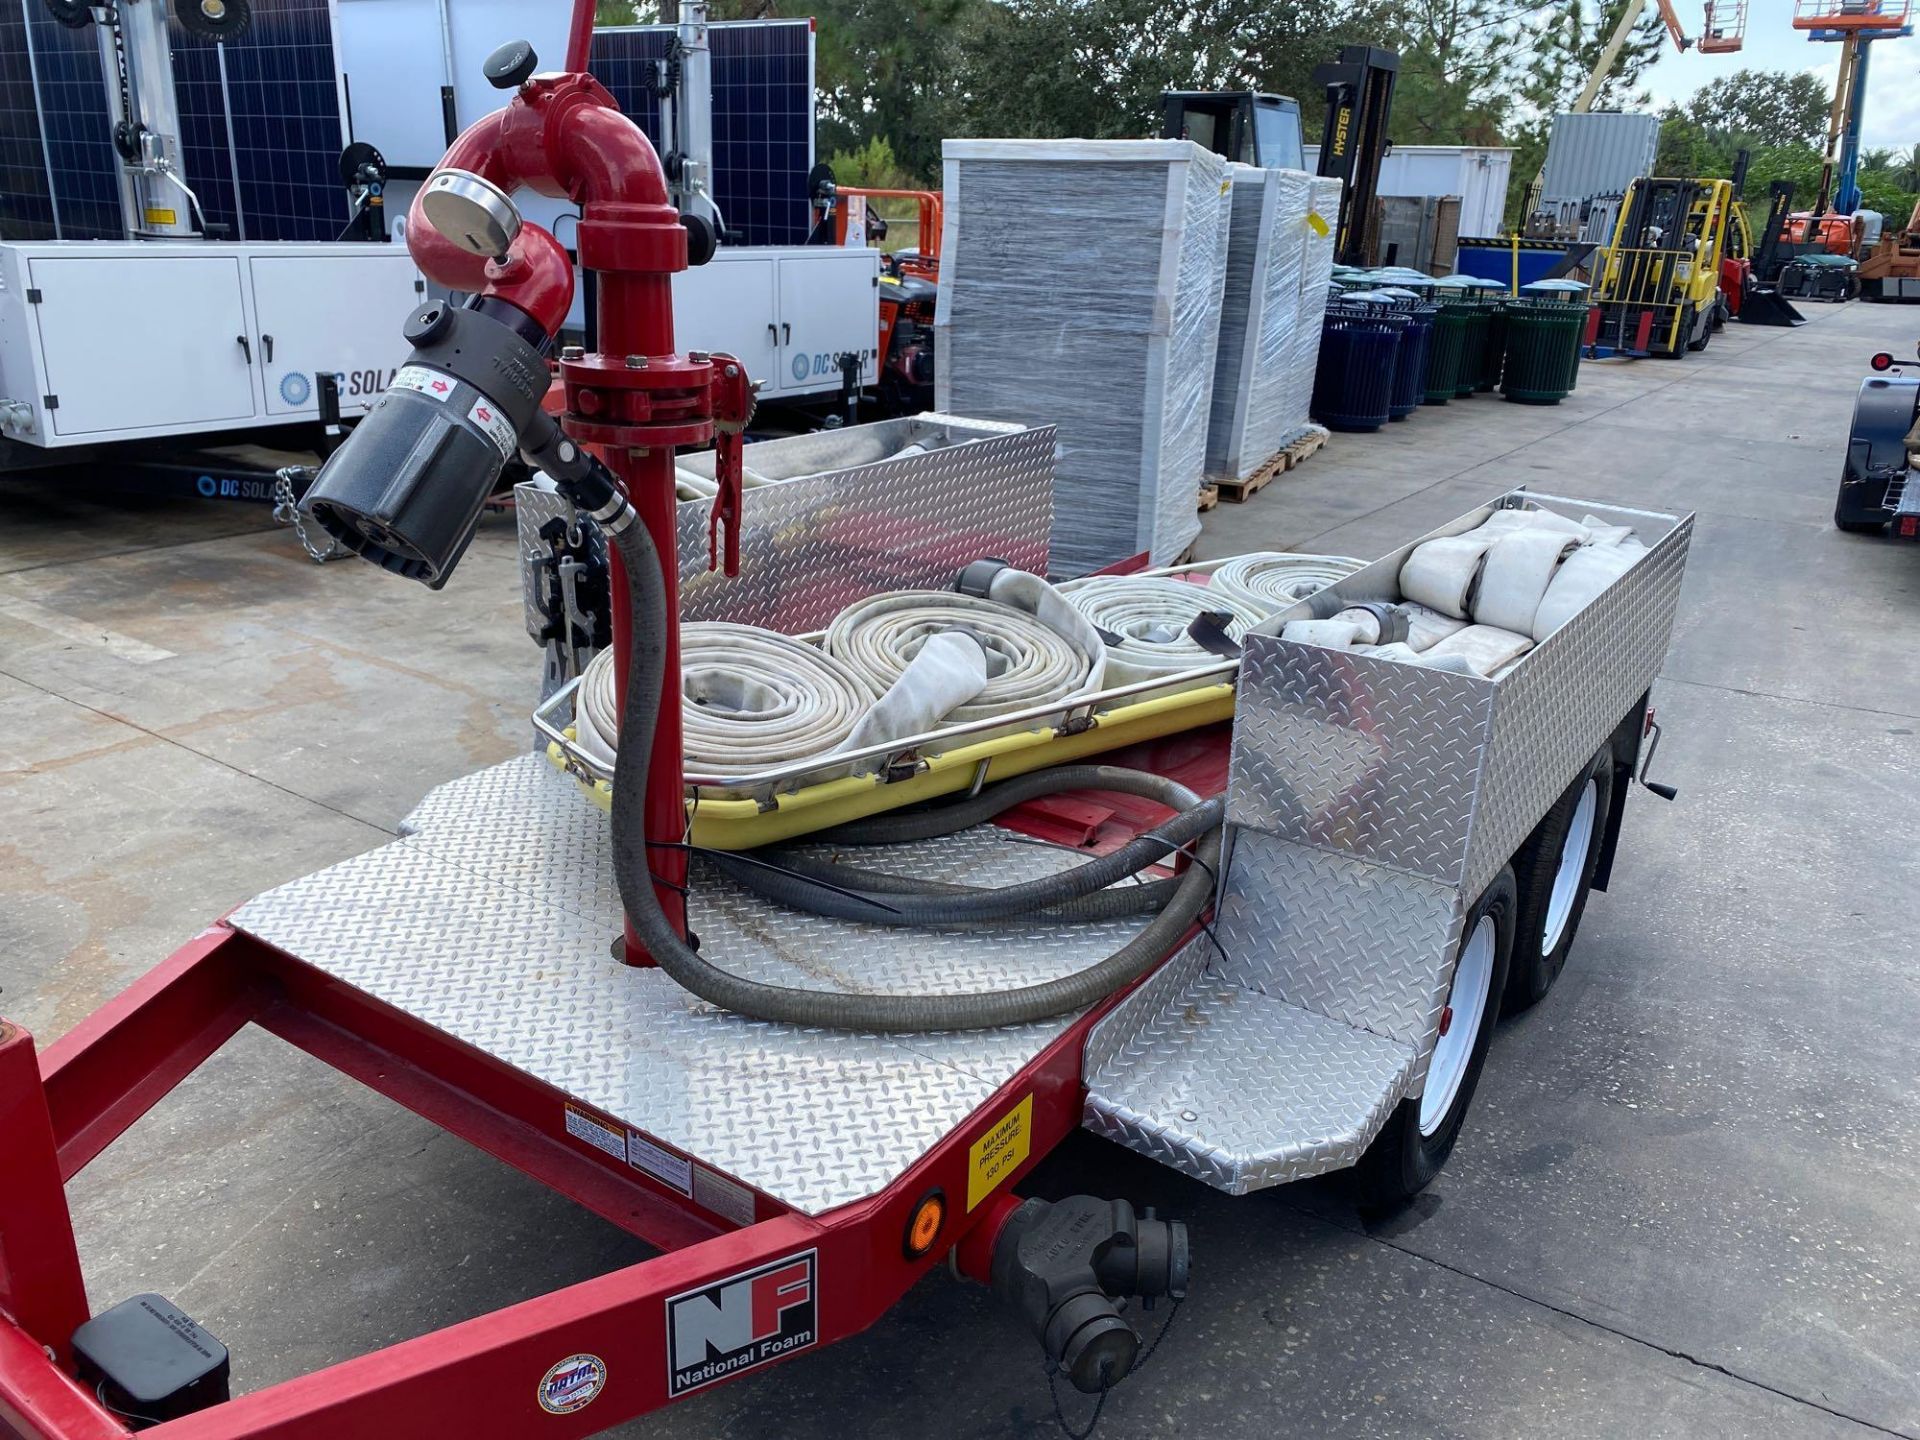 MGS INC. FIRE SUPPORT TRAILER WITH HOSES, STRETCHER, NATIONAL FOAM NOZZLE/ATTACHMENT - Image 9 of 14